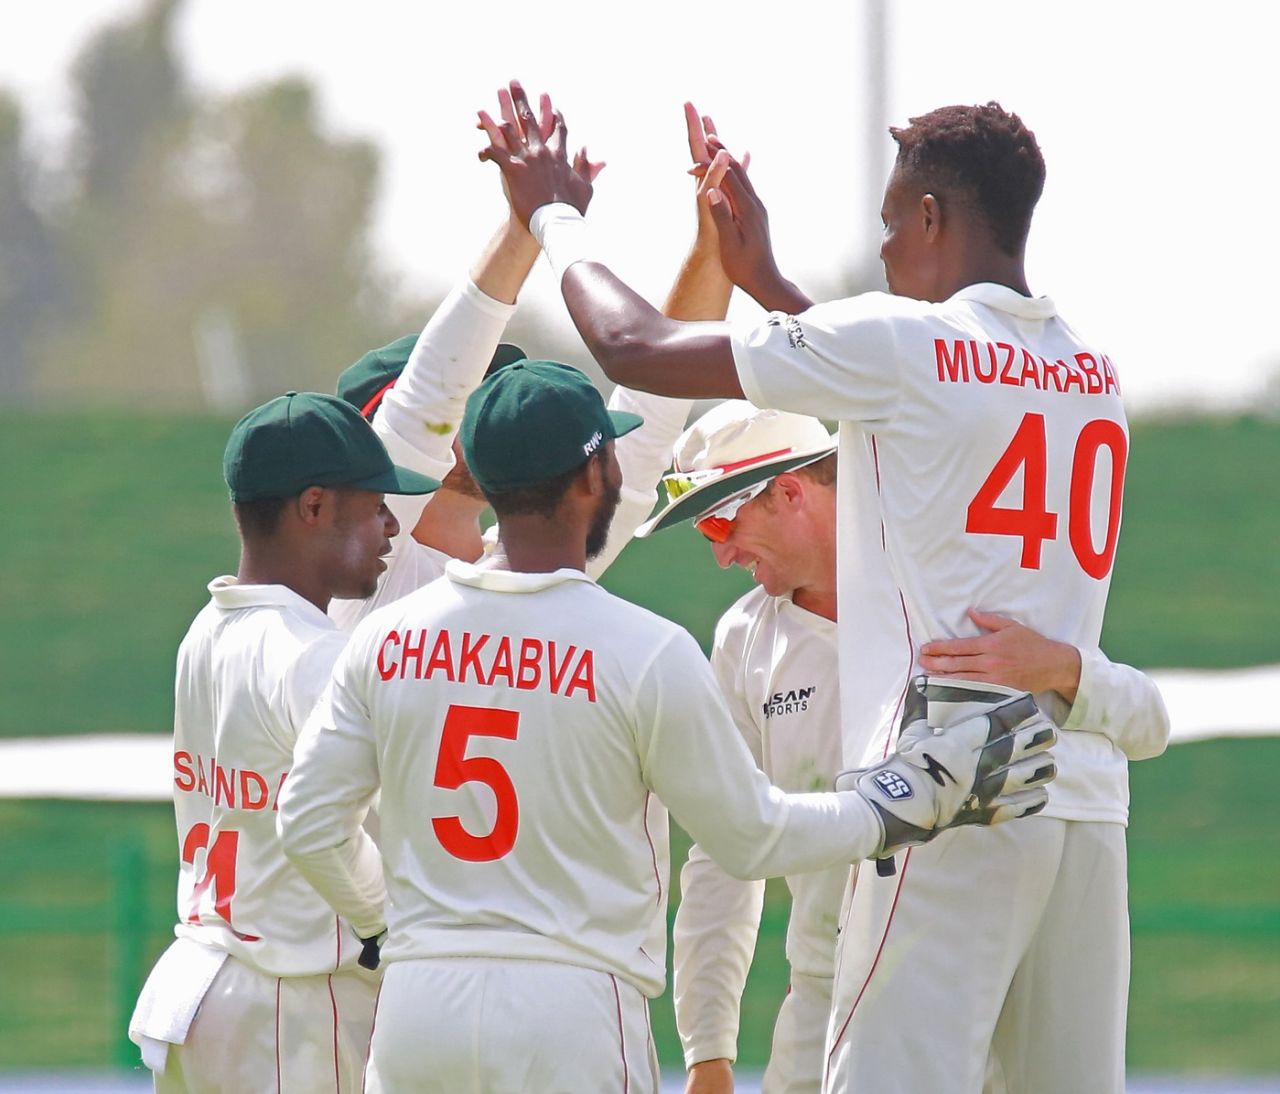 Blessing Muzarabani celebrates a wicket with his team-mates, Afghanistan vs Zimbabwe, 1st Test, Abu Dhabi, 1st day, March 2, 2021